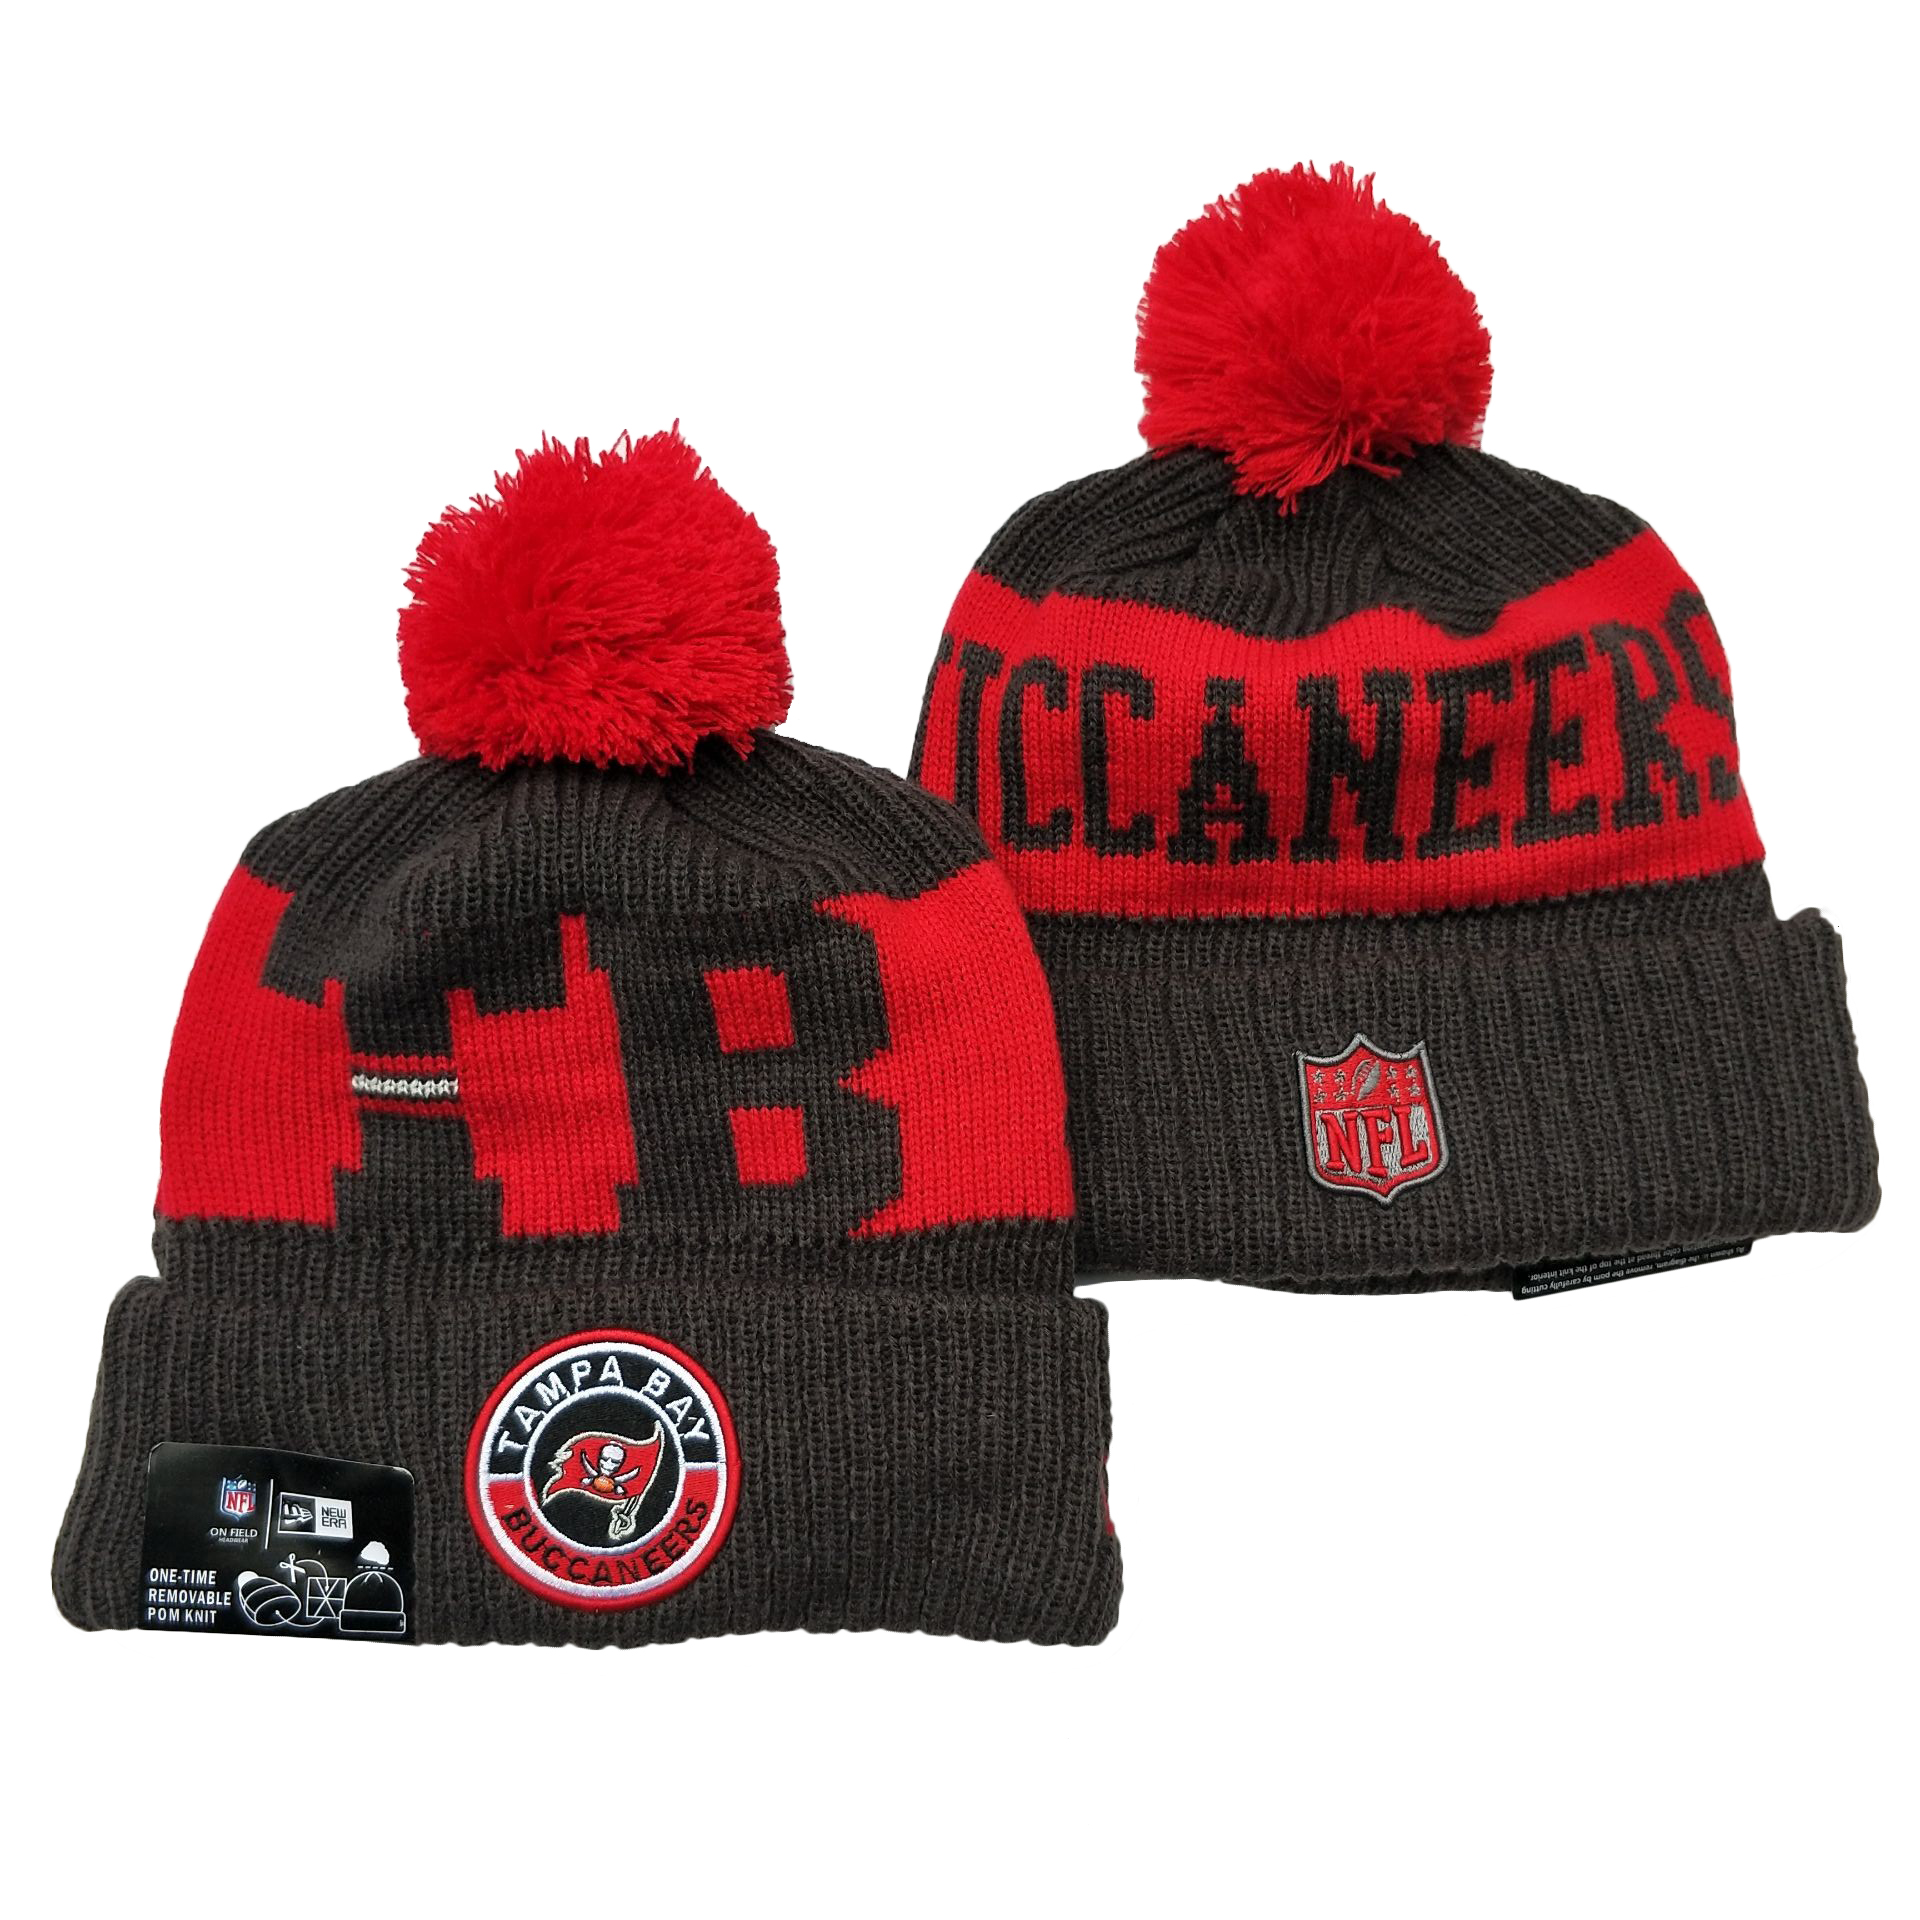 Tampa Bay Buccaneers 2021 Knit Hats 007